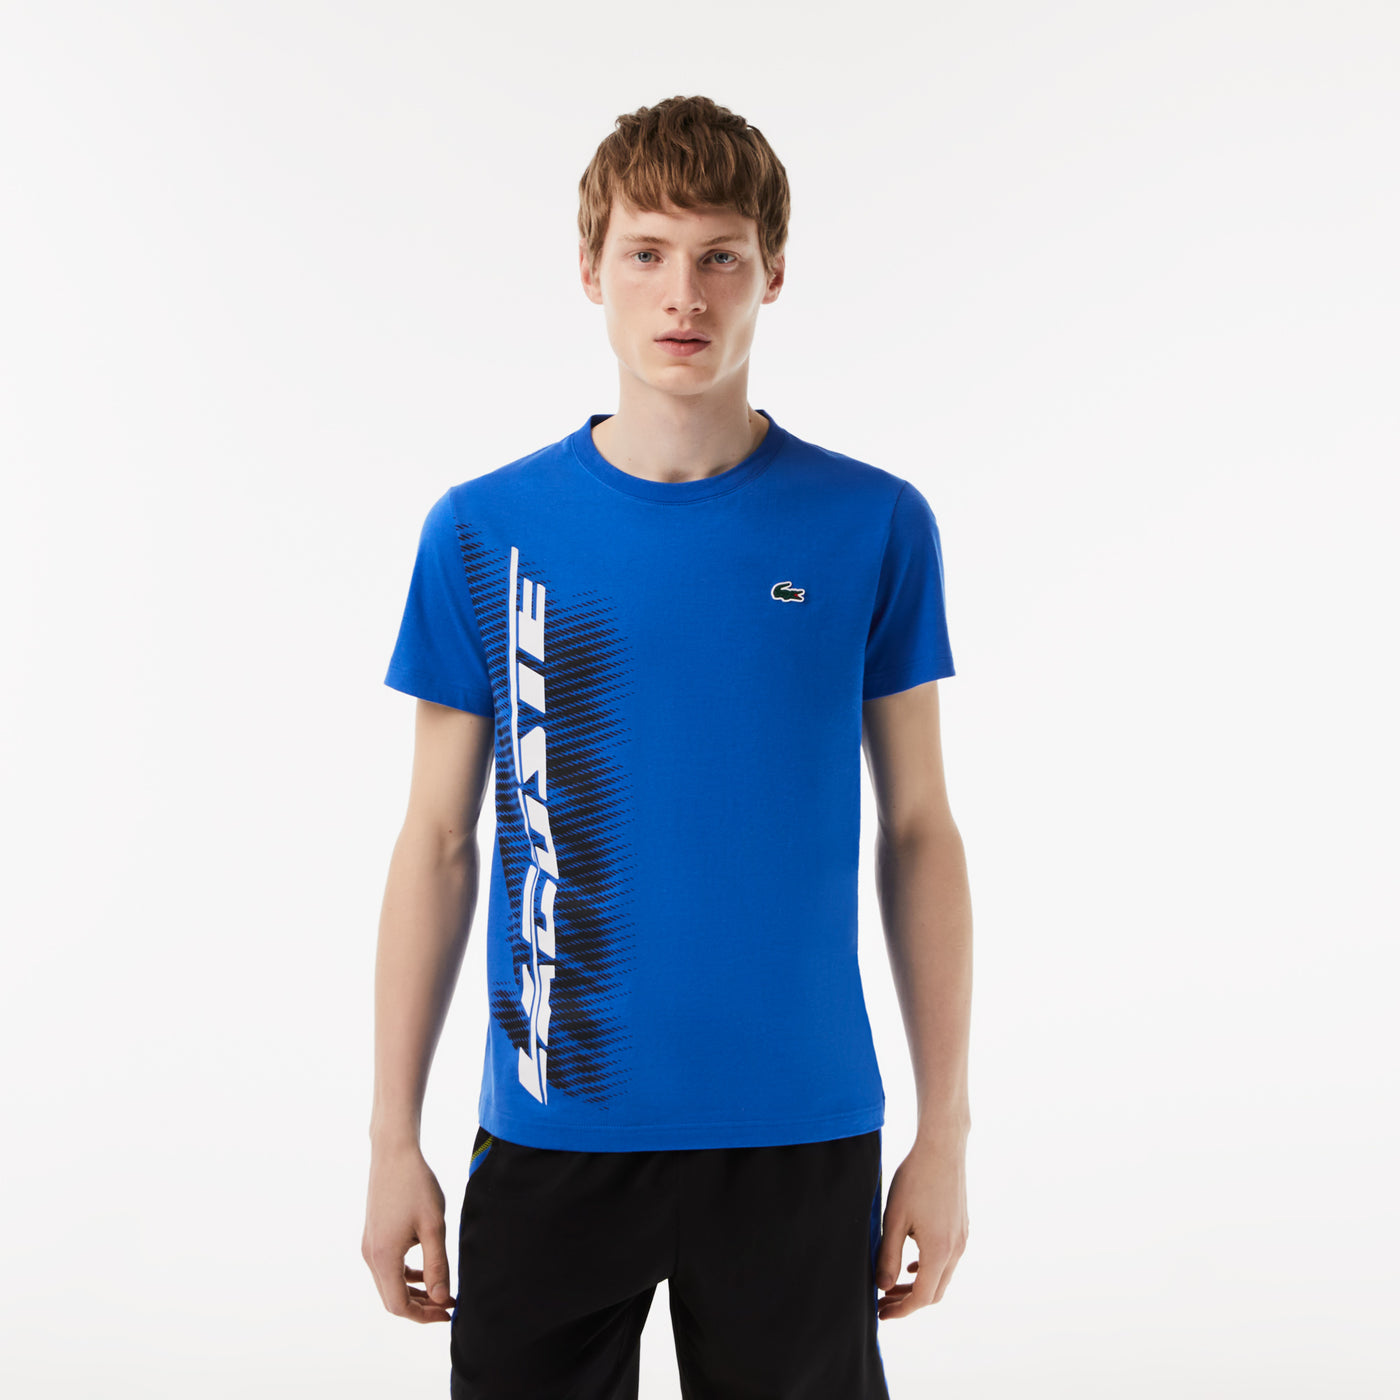 Men’S Lacoste Sport Regular Fit T-Shirt With Contrast Branding - Th5189